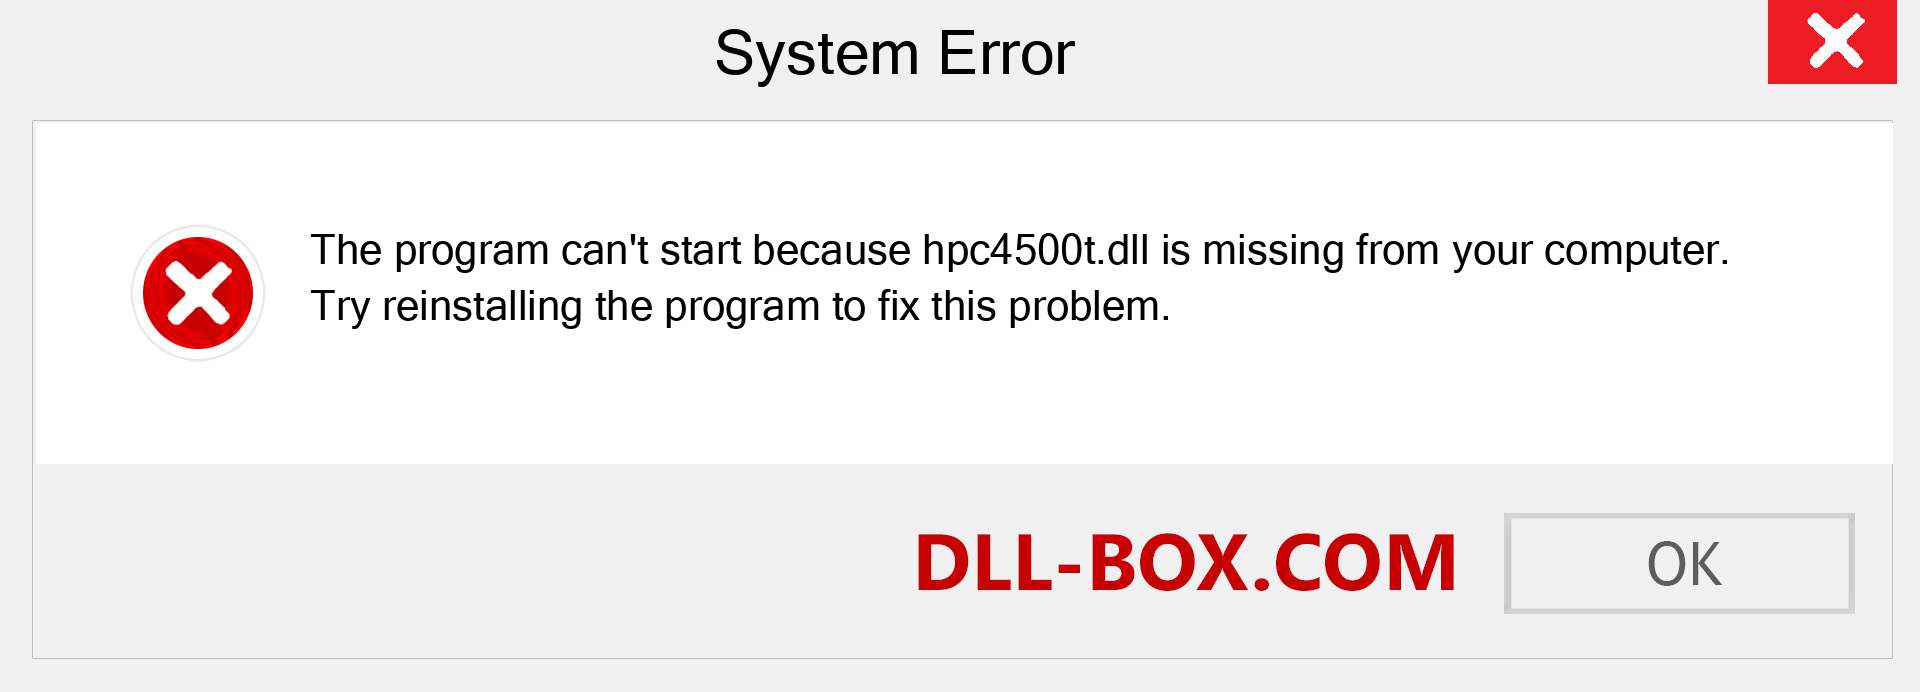  hpc4500t.dll file is missing?. Download for Windows 7, 8, 10 - Fix  hpc4500t dll Missing Error on Windows, photos, images